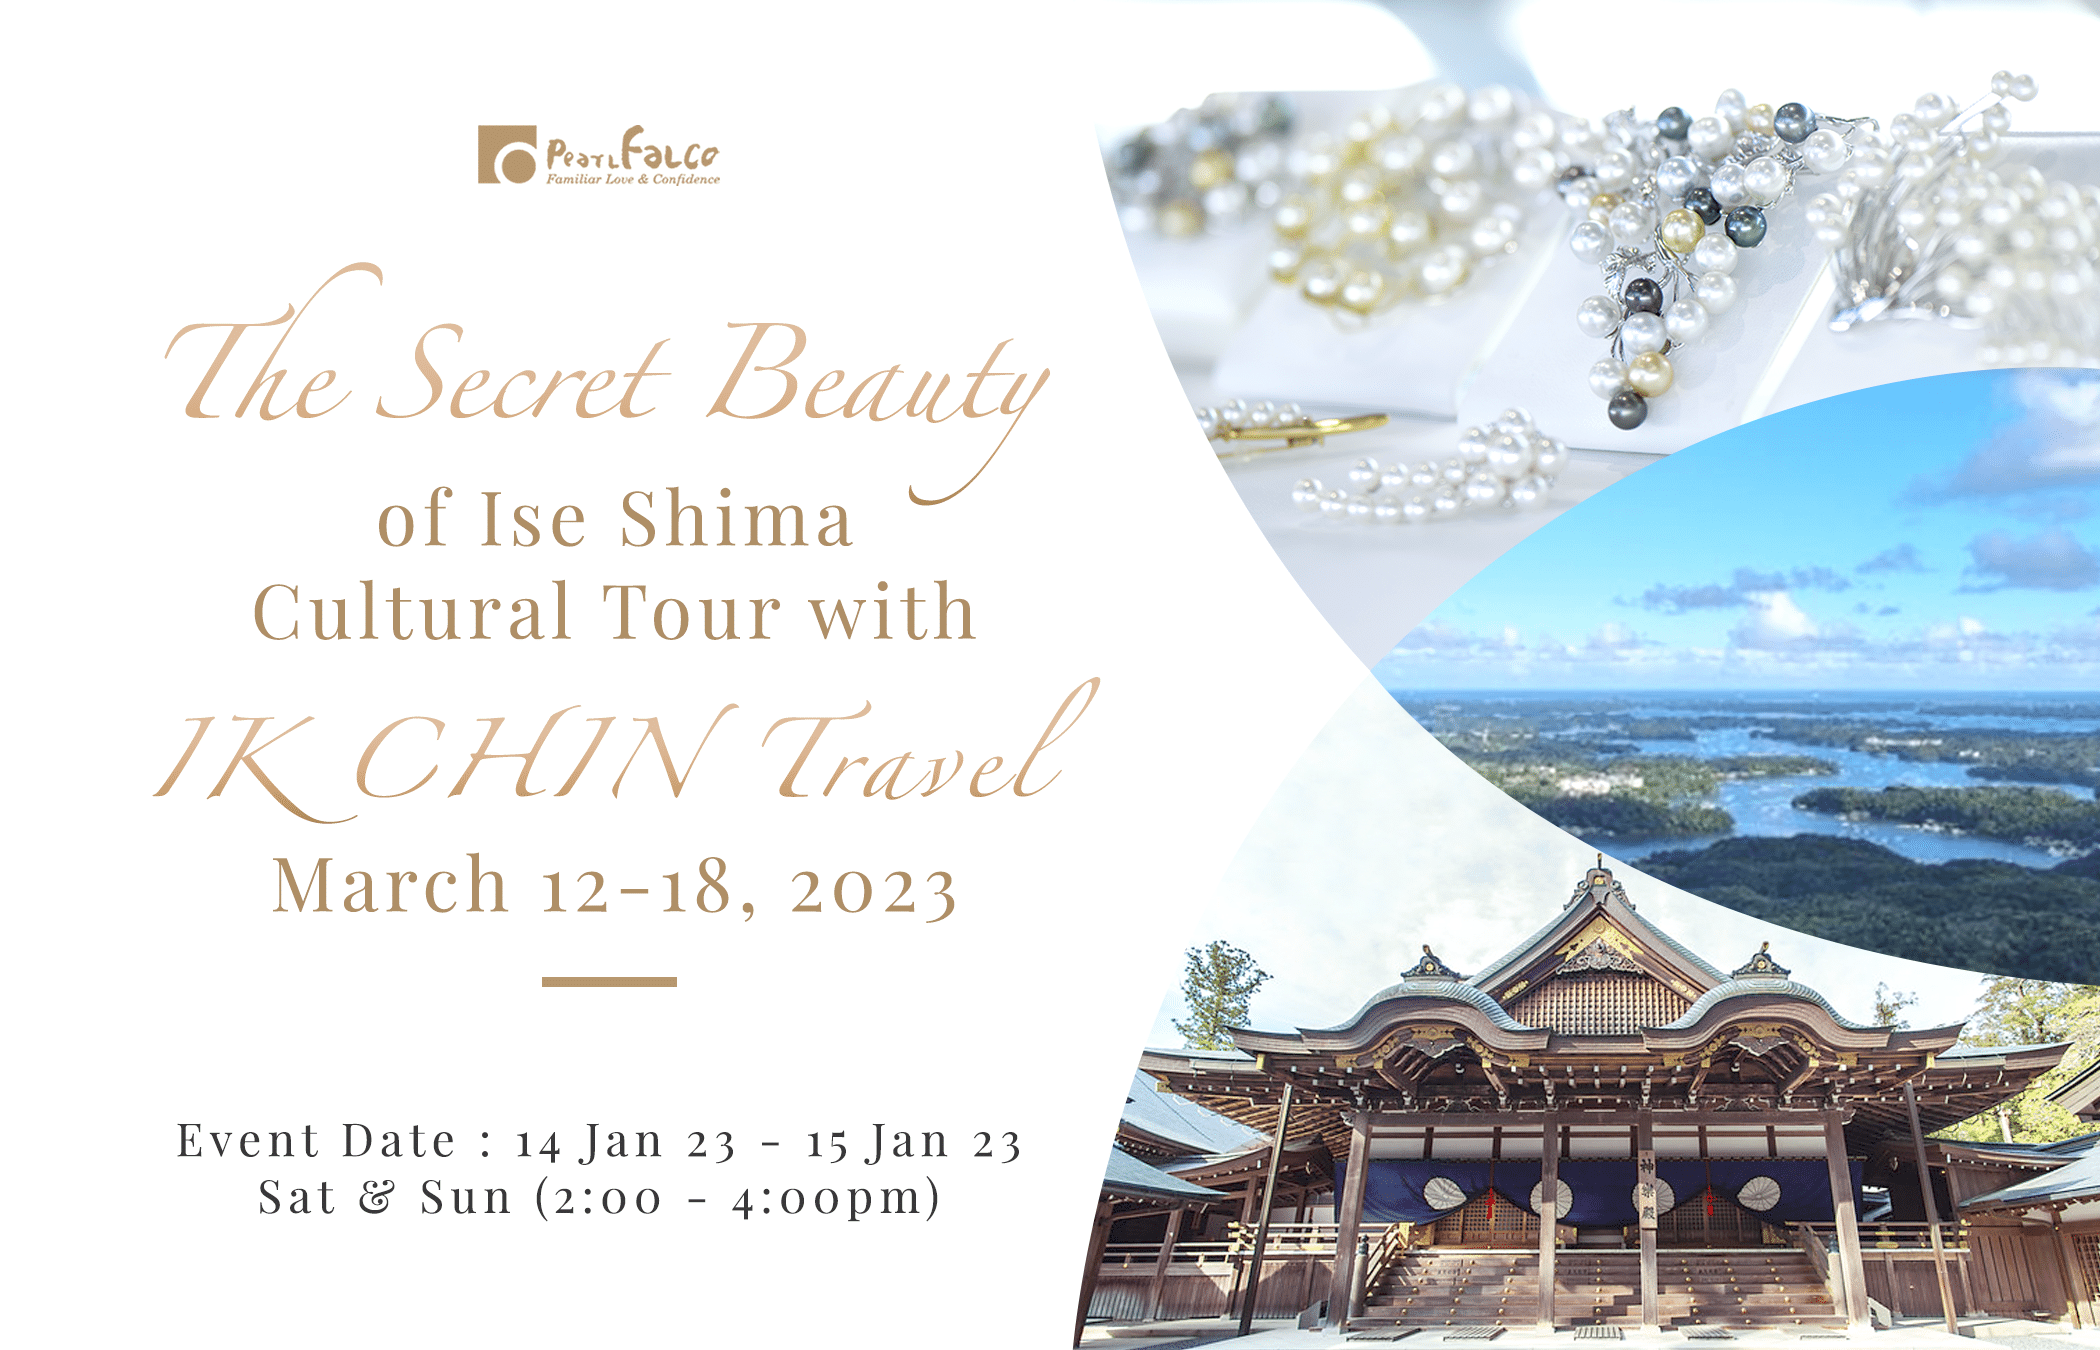 Discover the Secret Beauty of Ise Shima